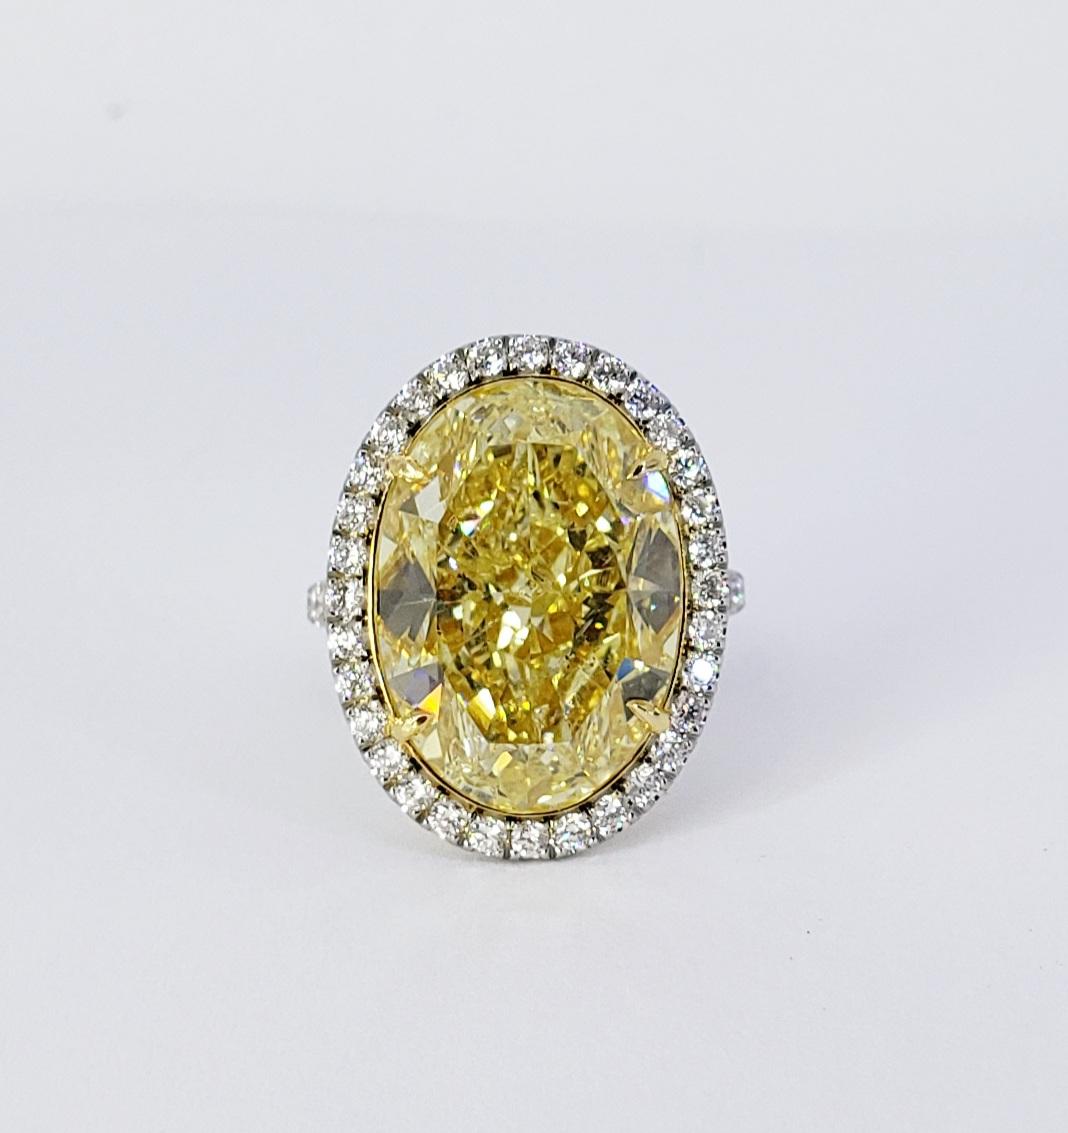 Rosenberg Diamonds & Co. 17.32 Oval shape Fancy Yellow SI2 Clarity is accompanied by a GIA certificate. This gorgeous Oval is full of life and is an exceptional SI2 that is set in a handmade platinum & 18 karat white setting. This ring continues its